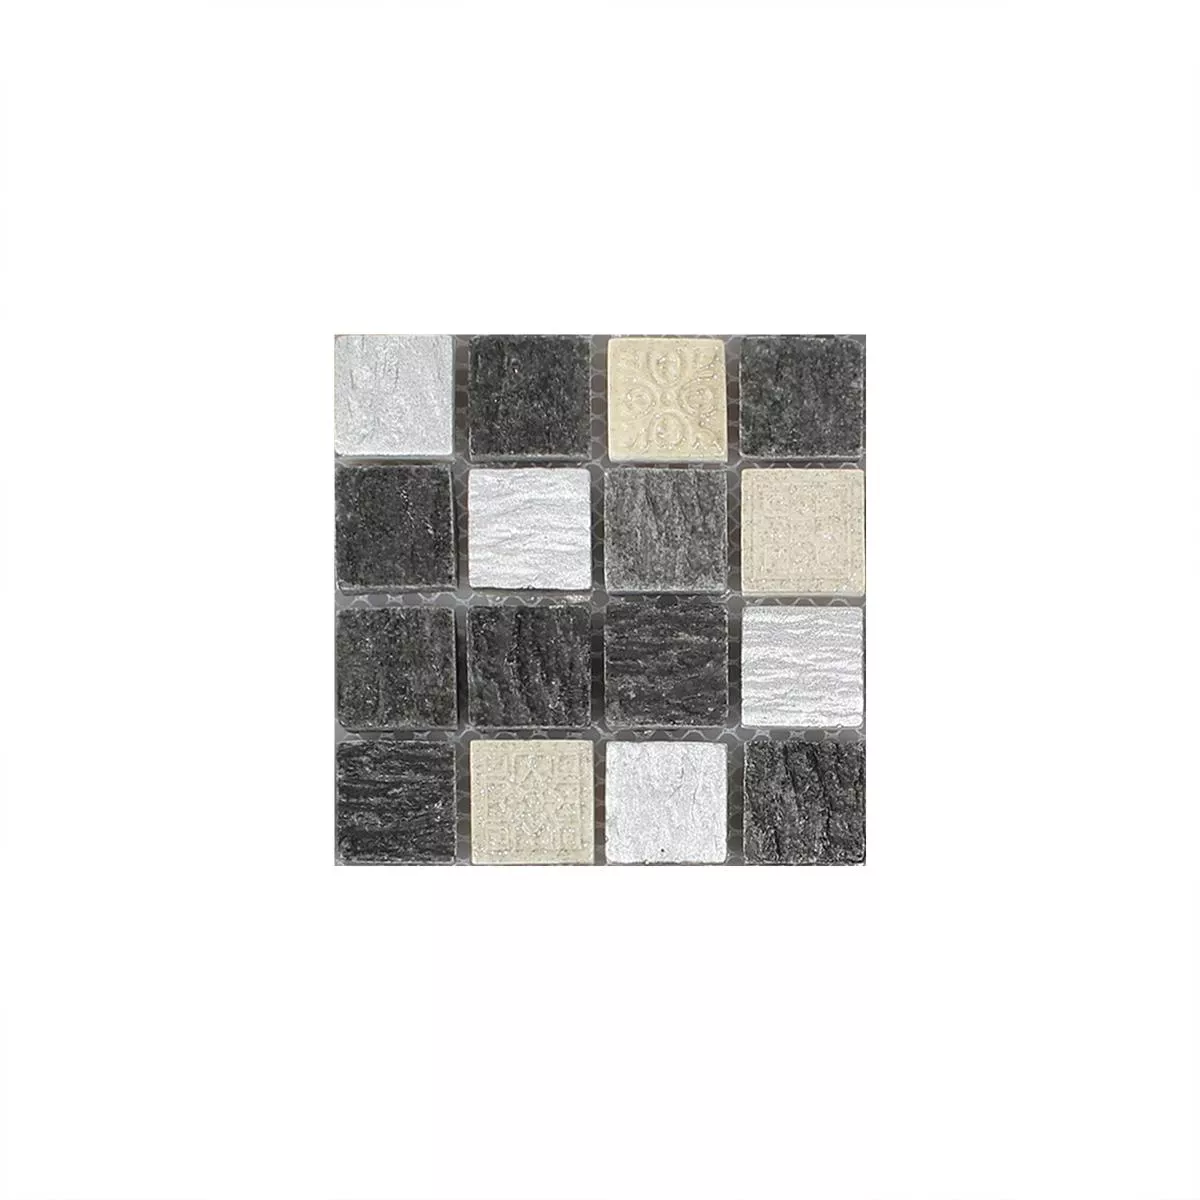 Sample Glass Mosaic Natural Stone Tiles Colicos Grey Black Silver